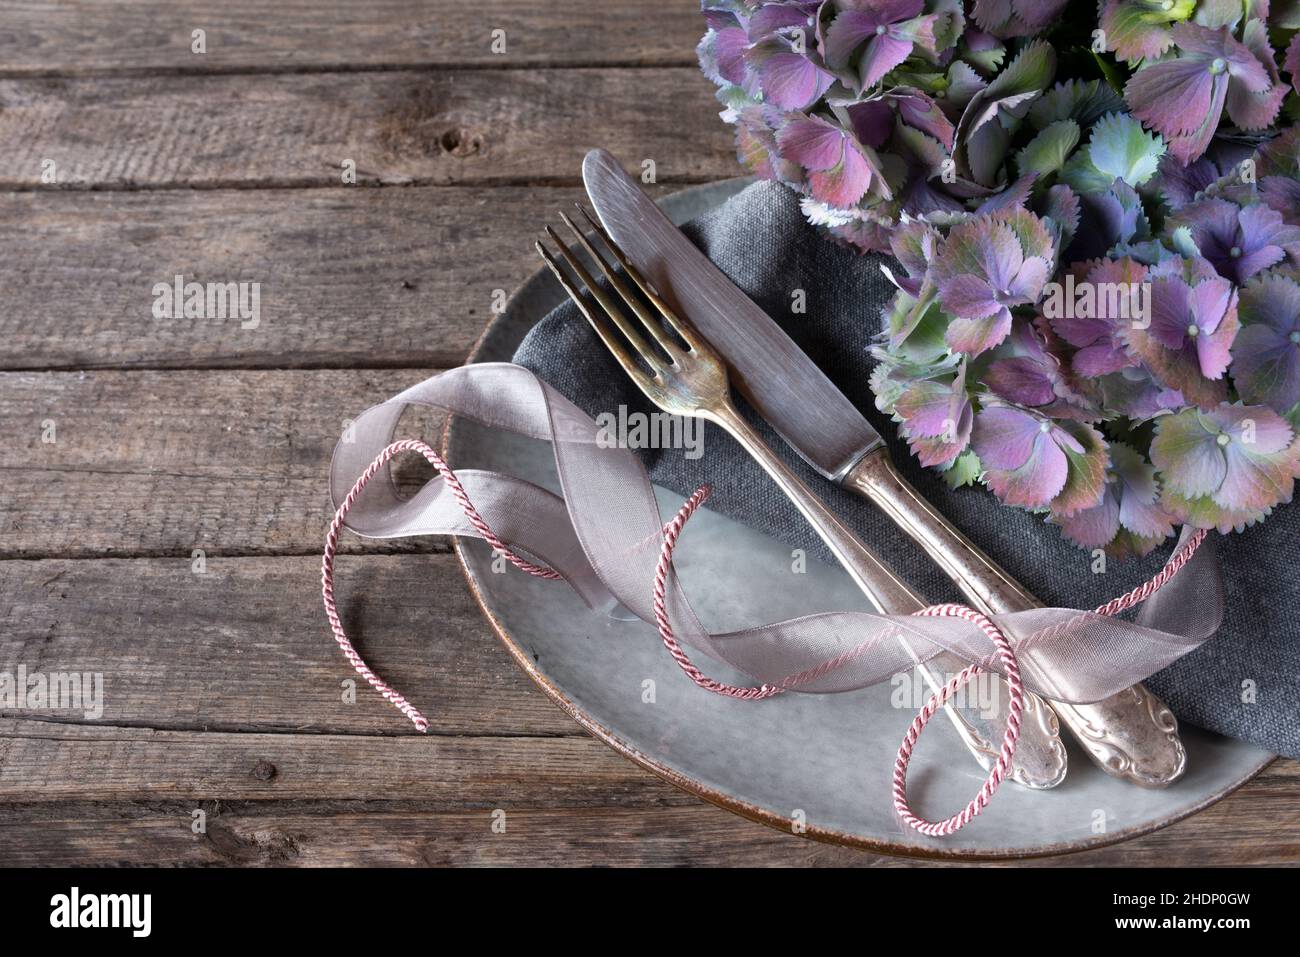 place setting, country style, country styles Stock Photo